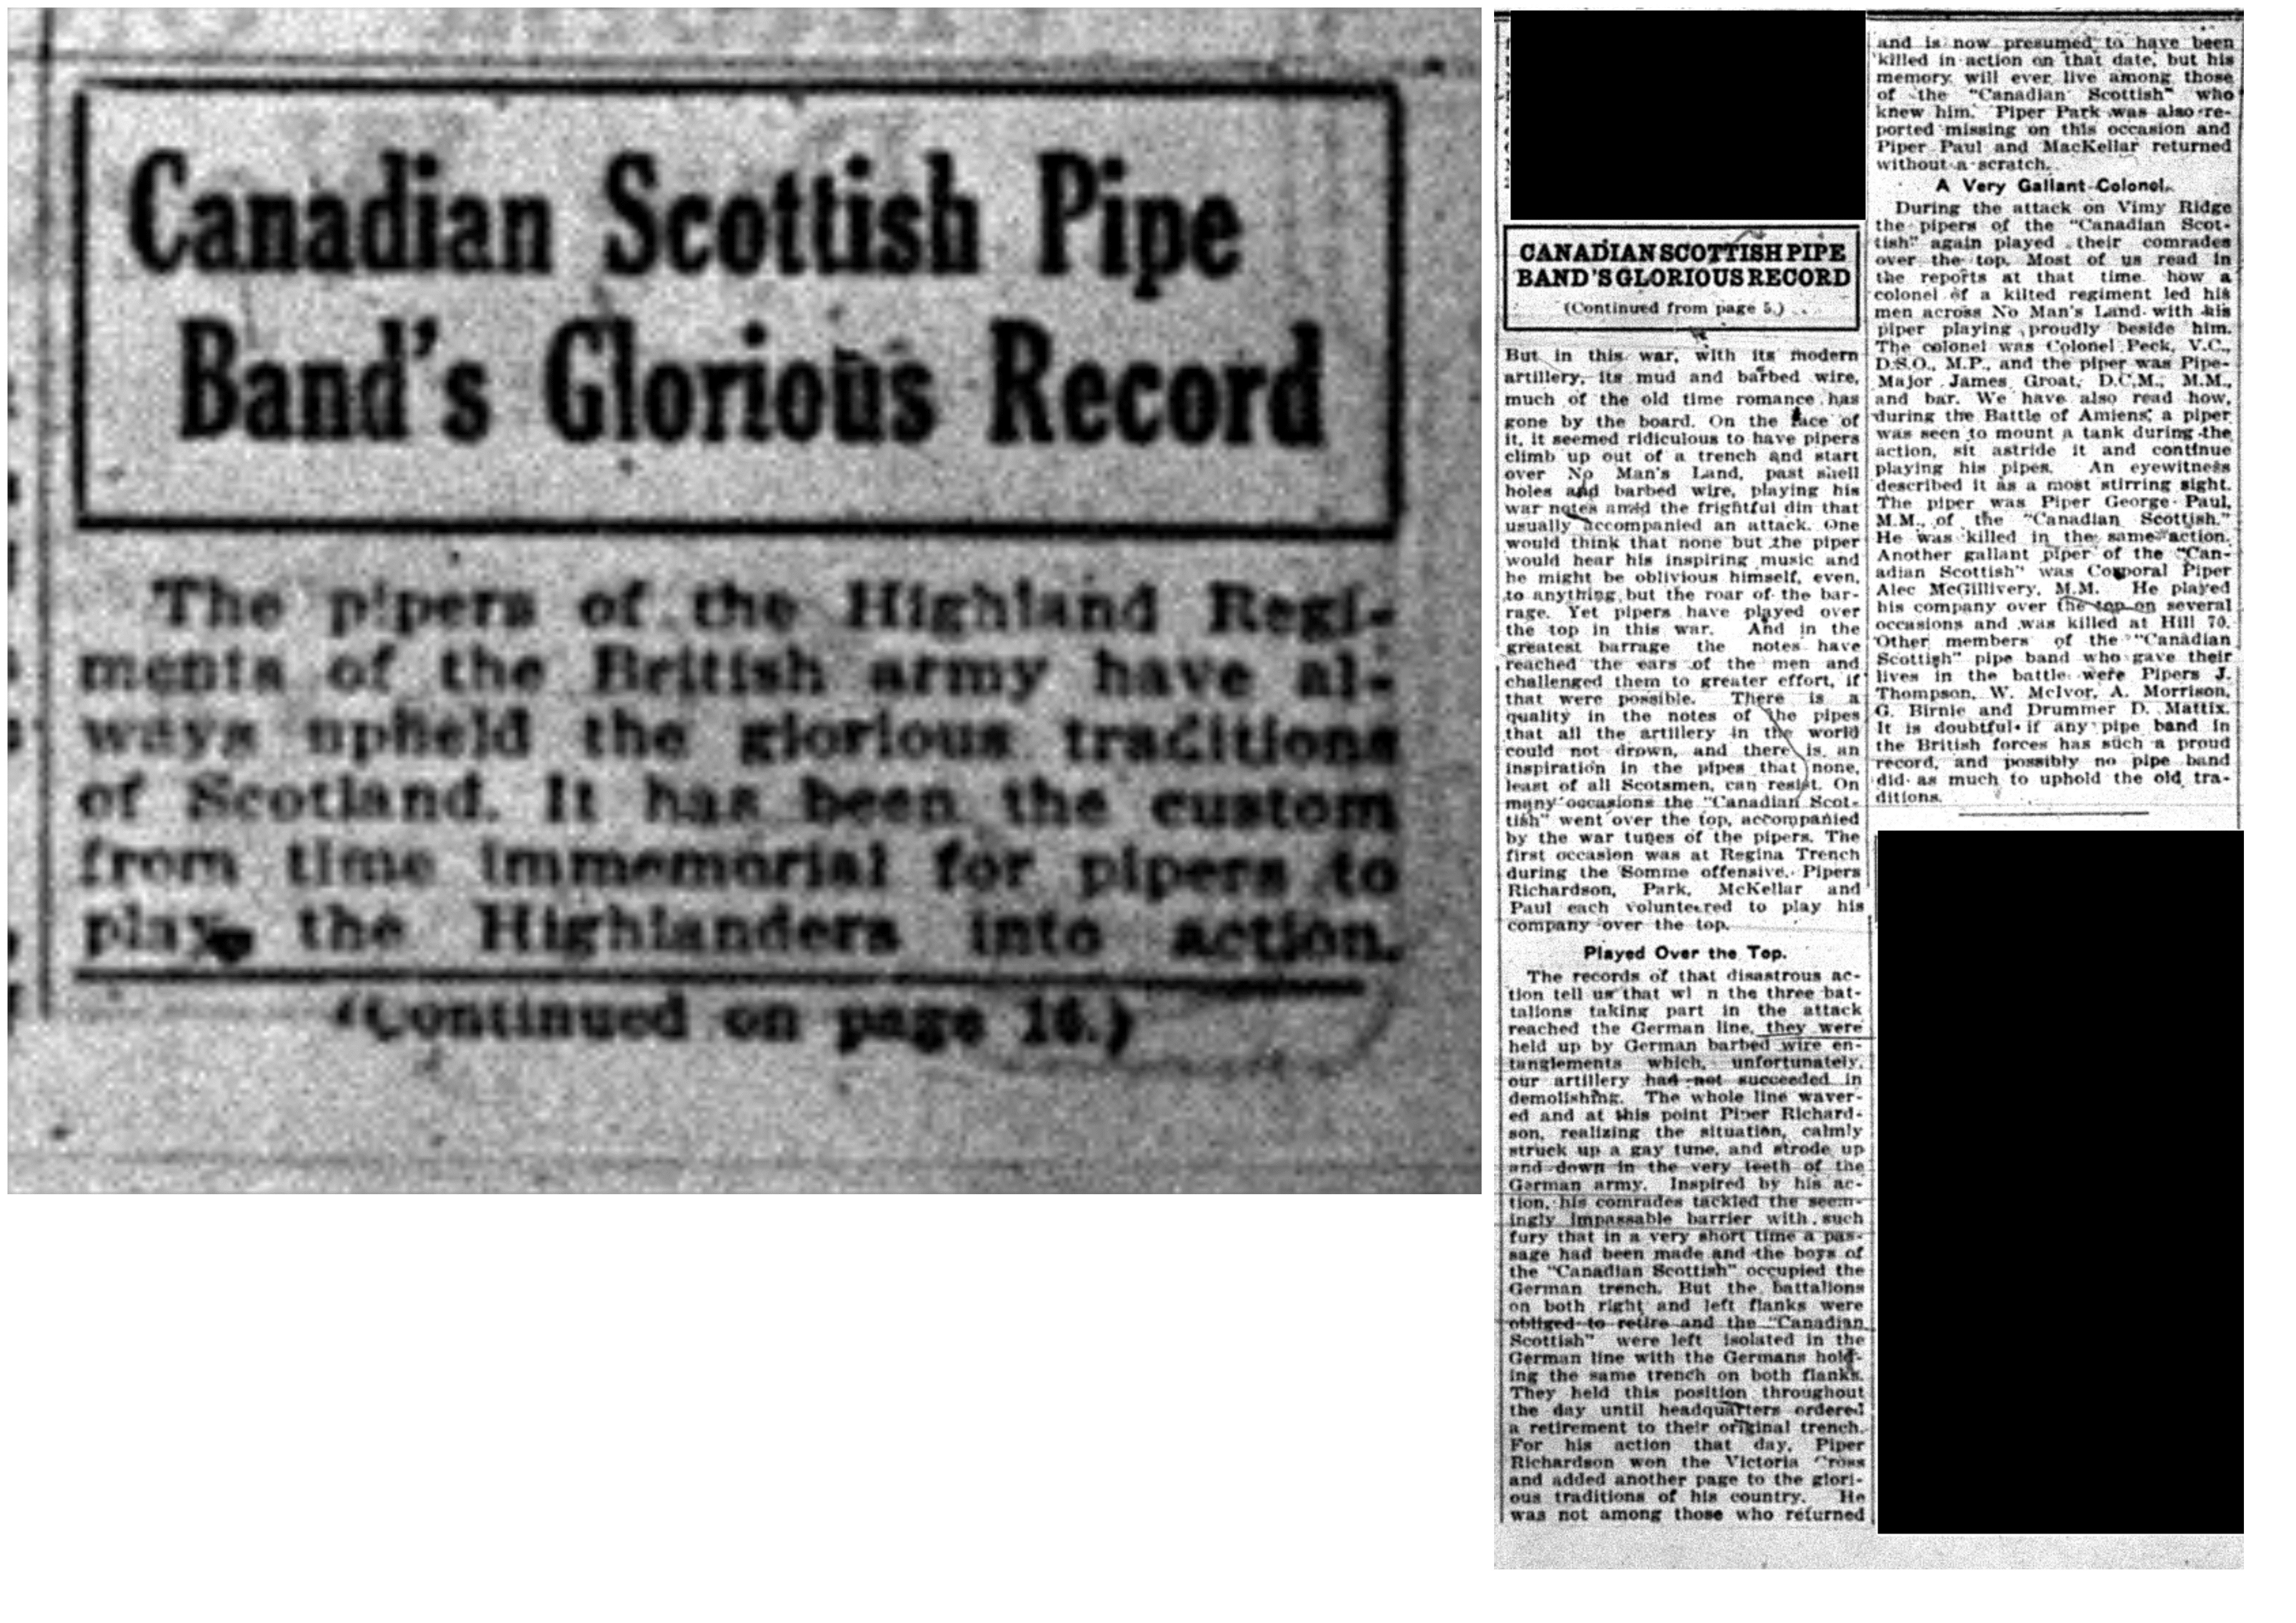 "Canadian Scottish Pipe Band's Glorious Record"